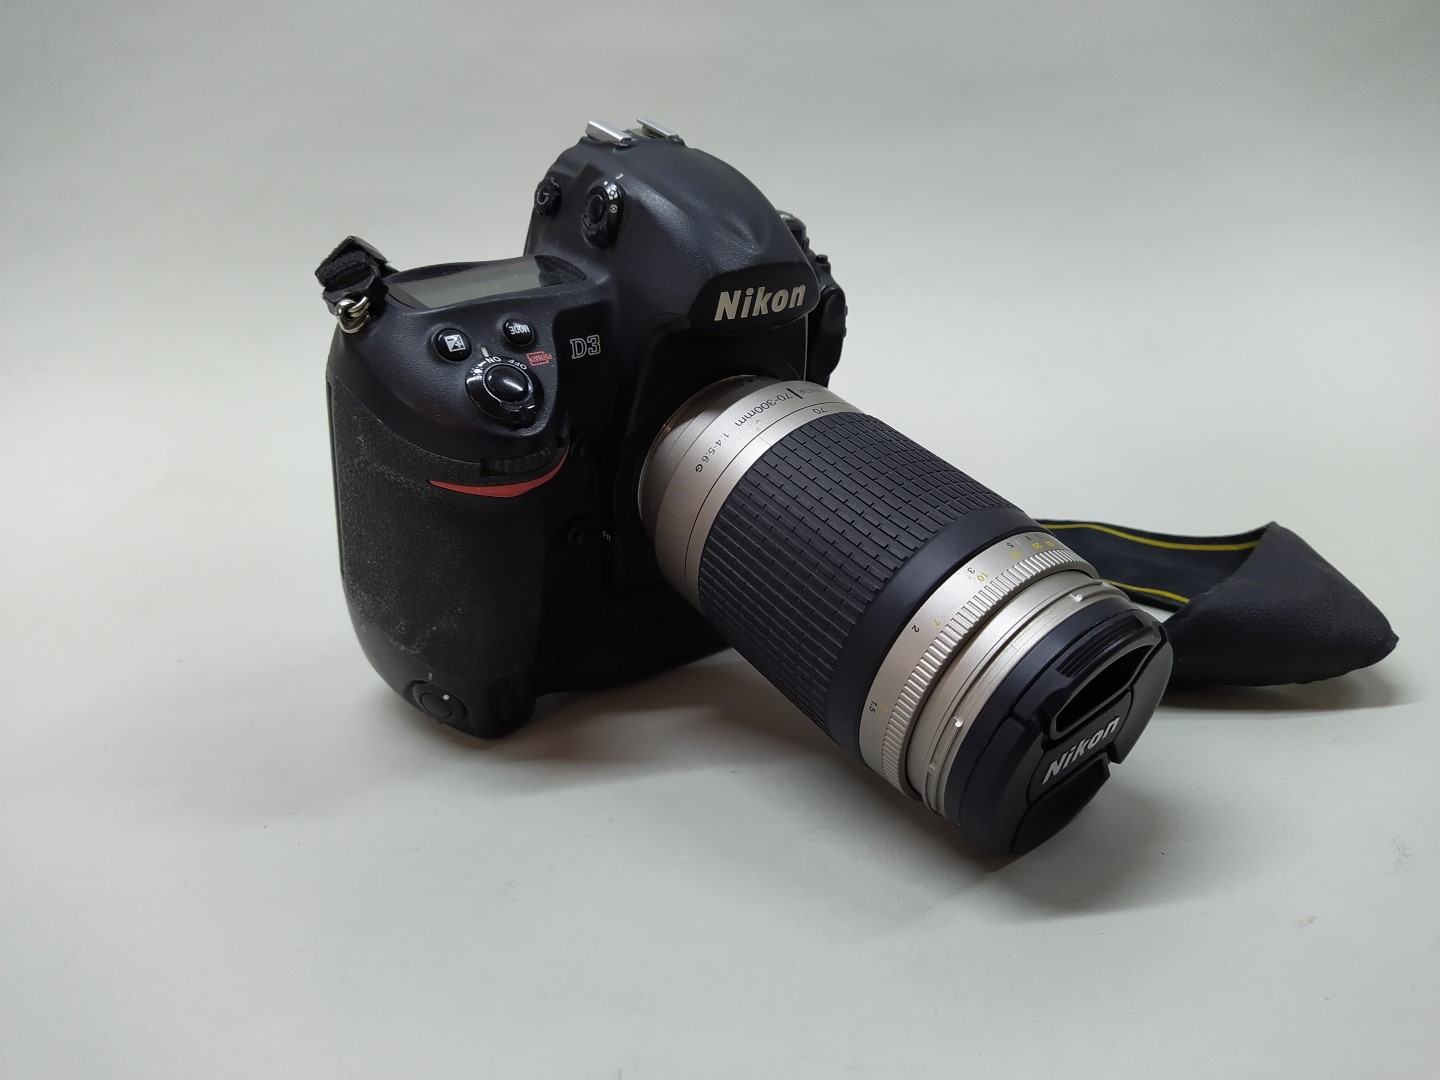 A Nikon D3 camera body with a Nikon 70-300mm lens and charger (as found) in original box - Image 2 of 3